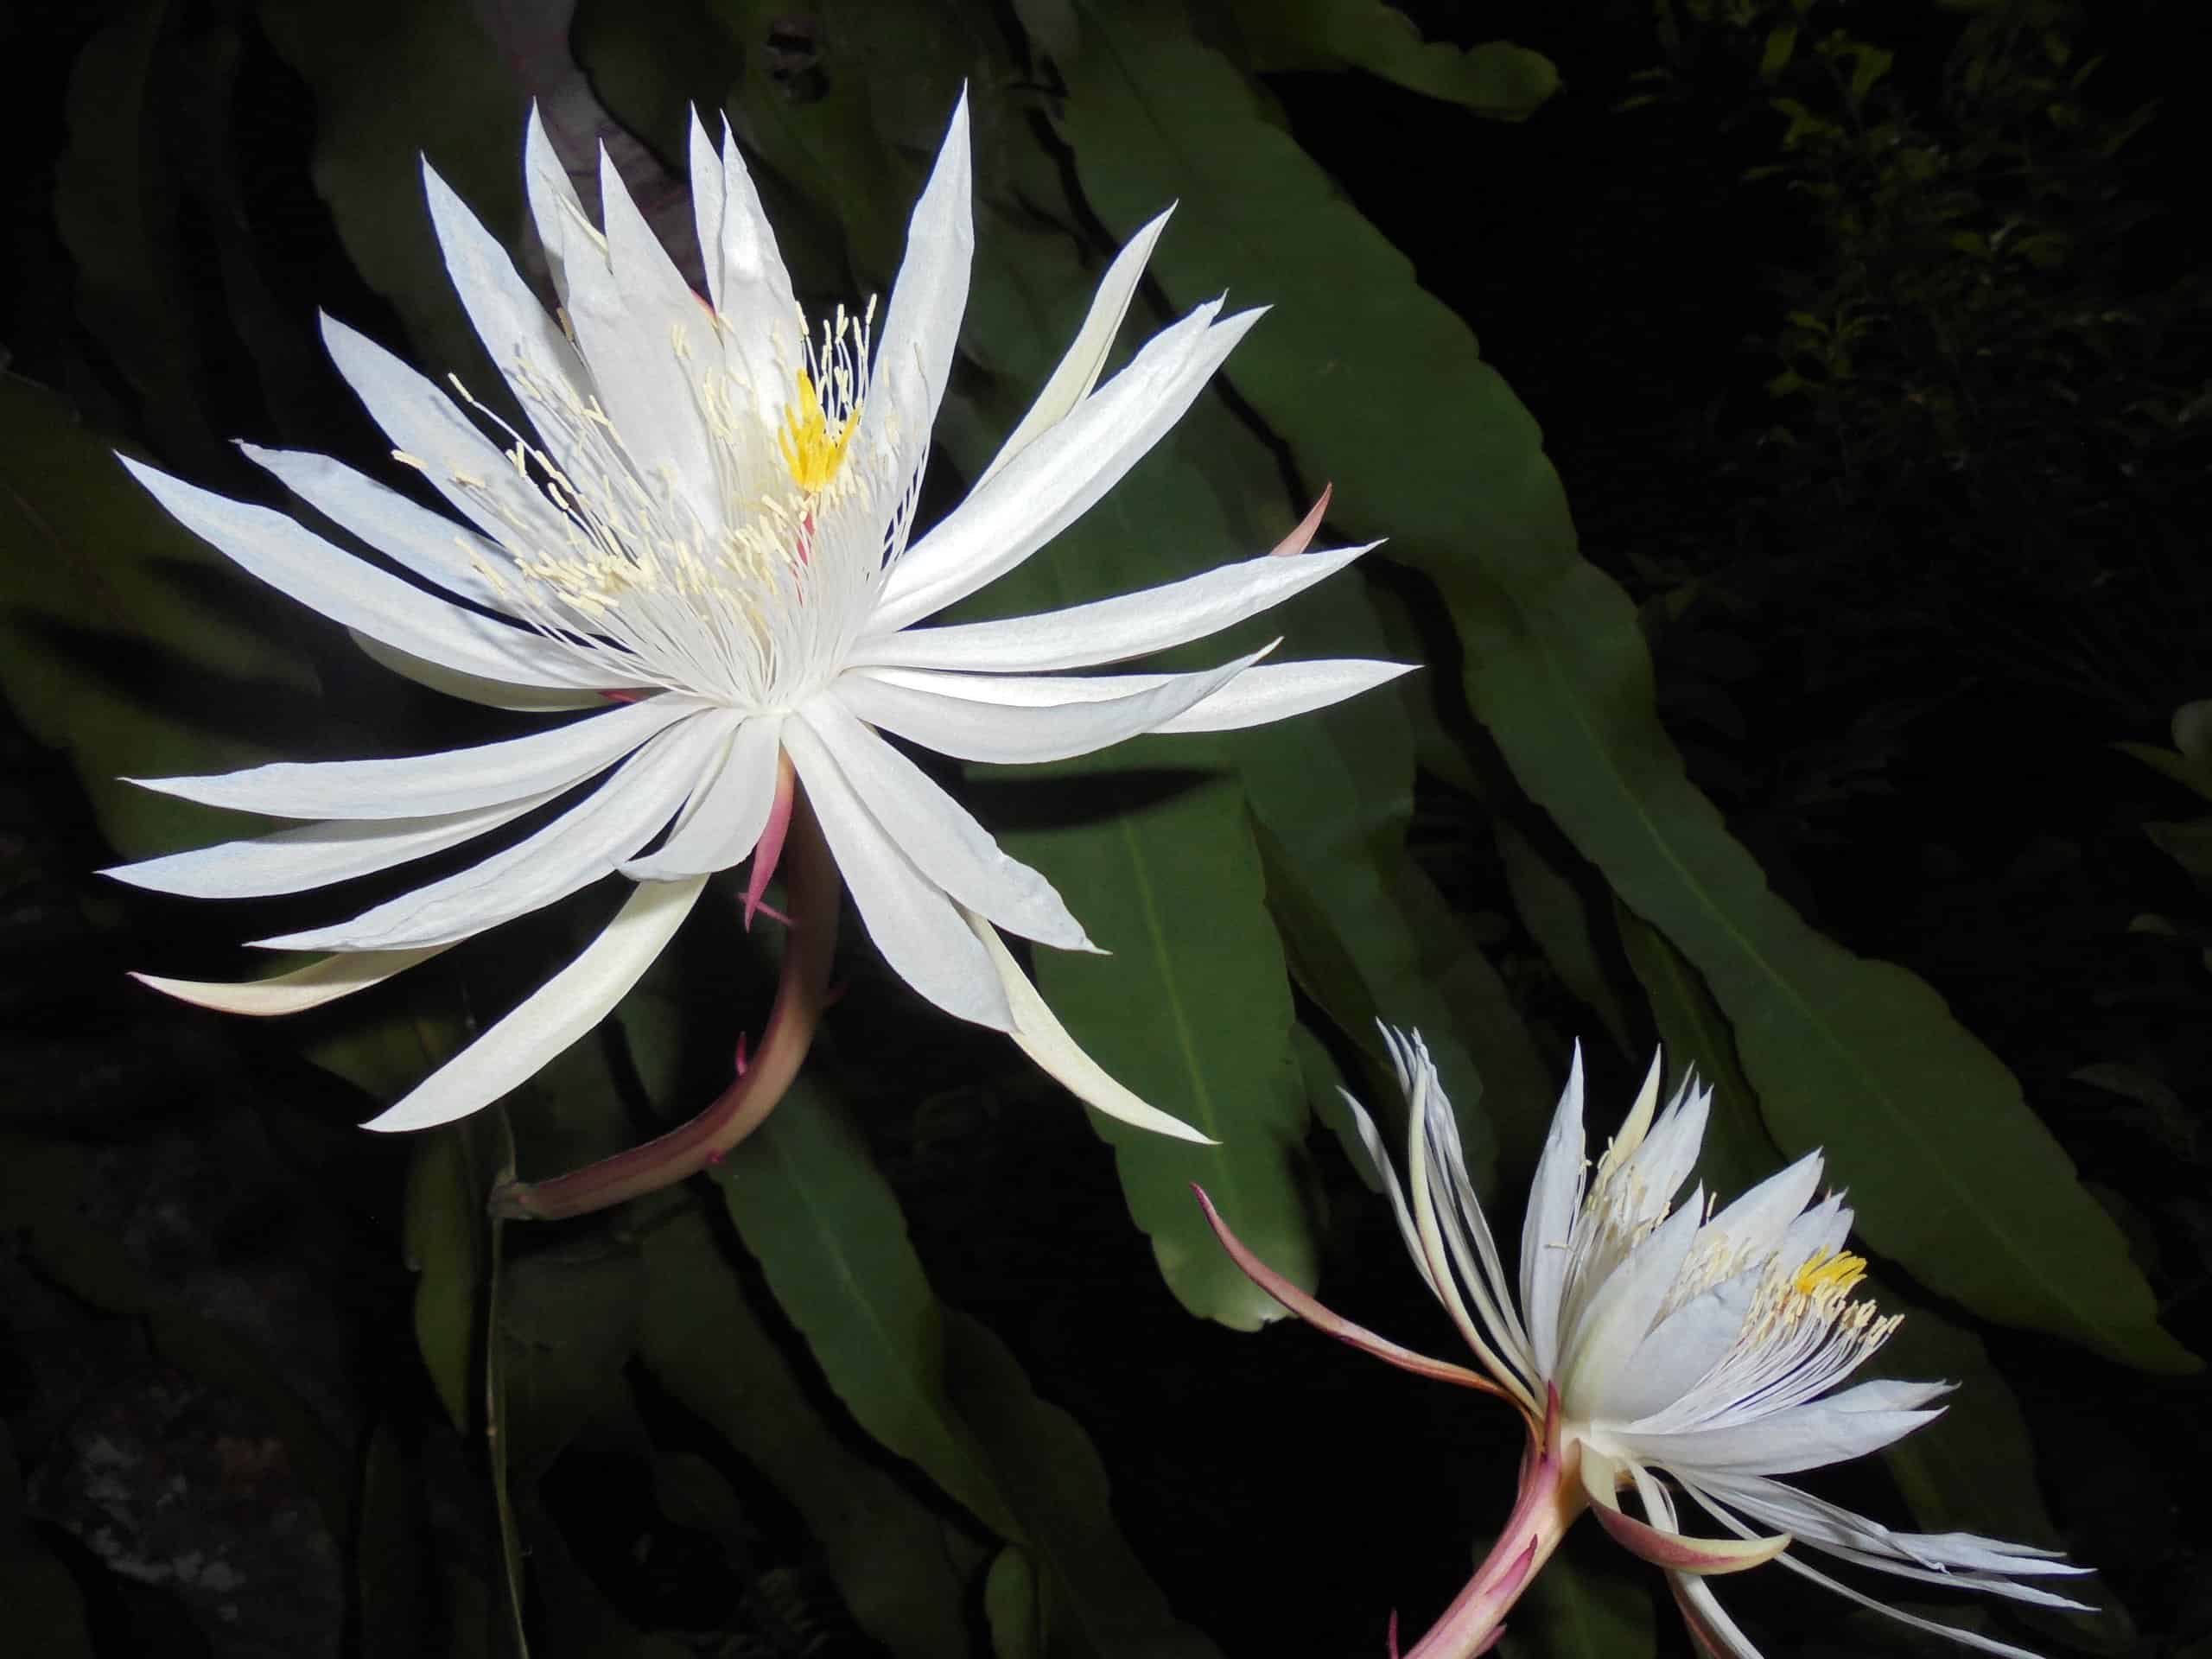 Night Blooming Cactus - Varieties, How to Propagate and More - A-Z